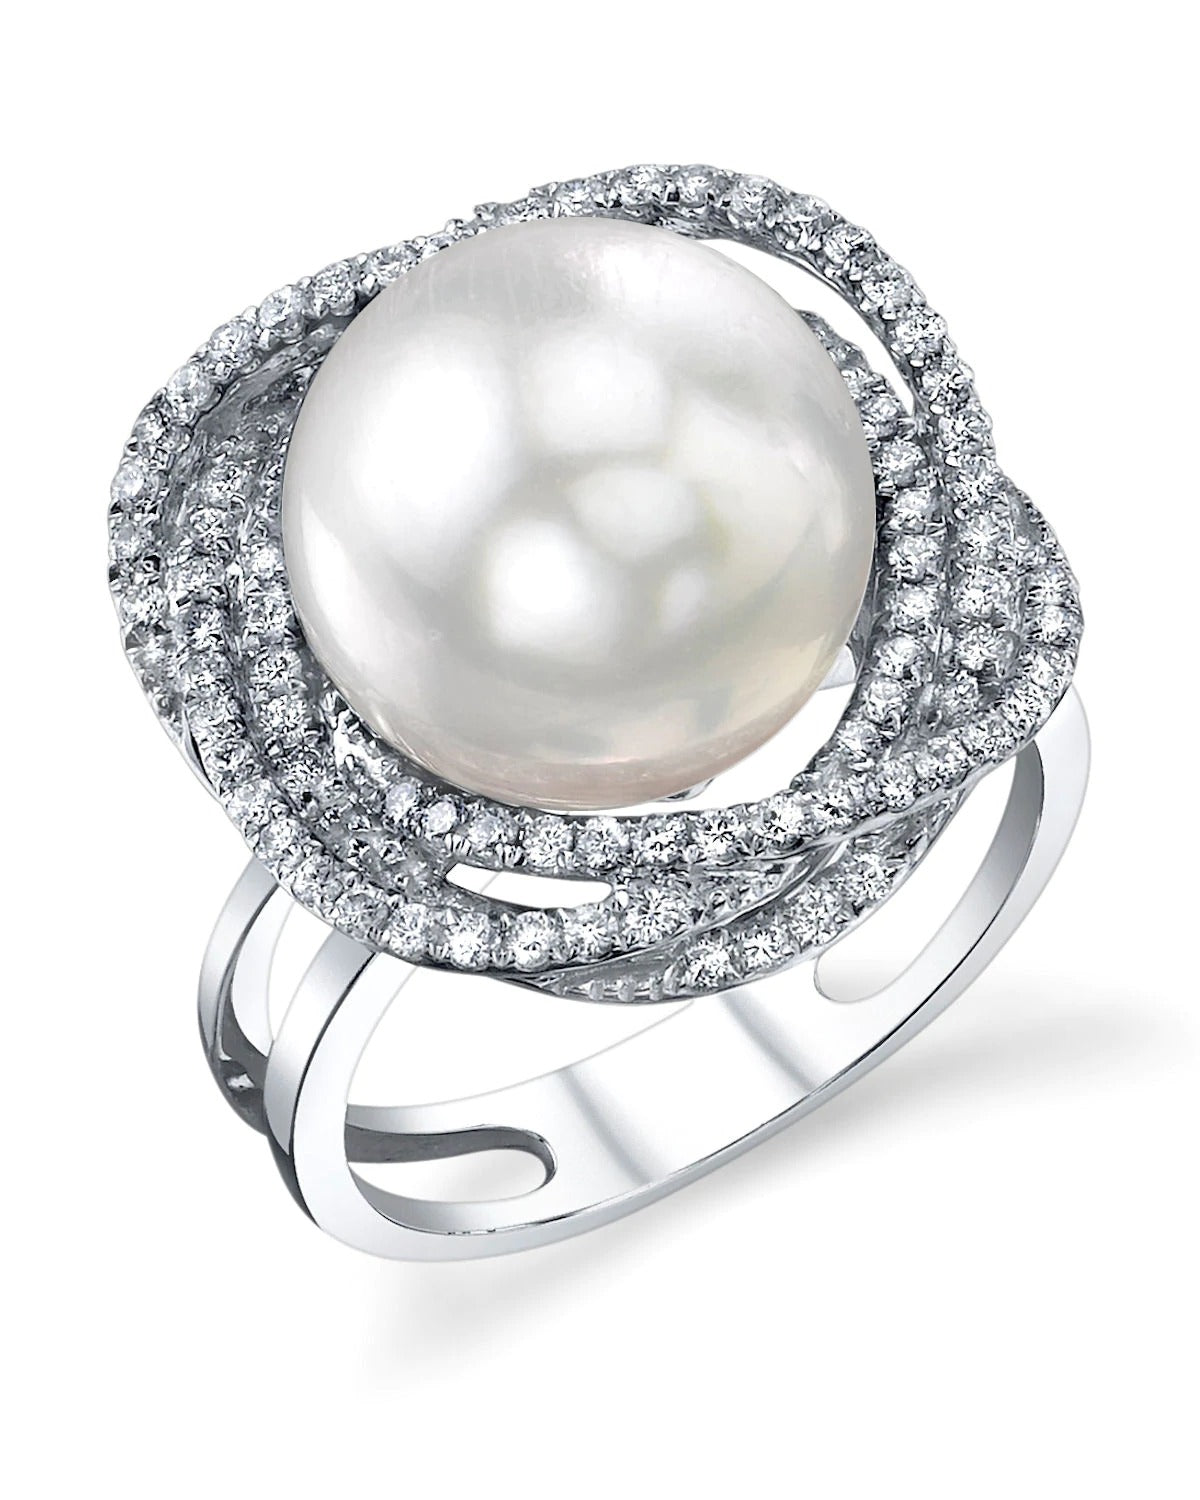 Close up shot showing diamond details of White South Sea Pearl & Diamond Orion Engagement Ring